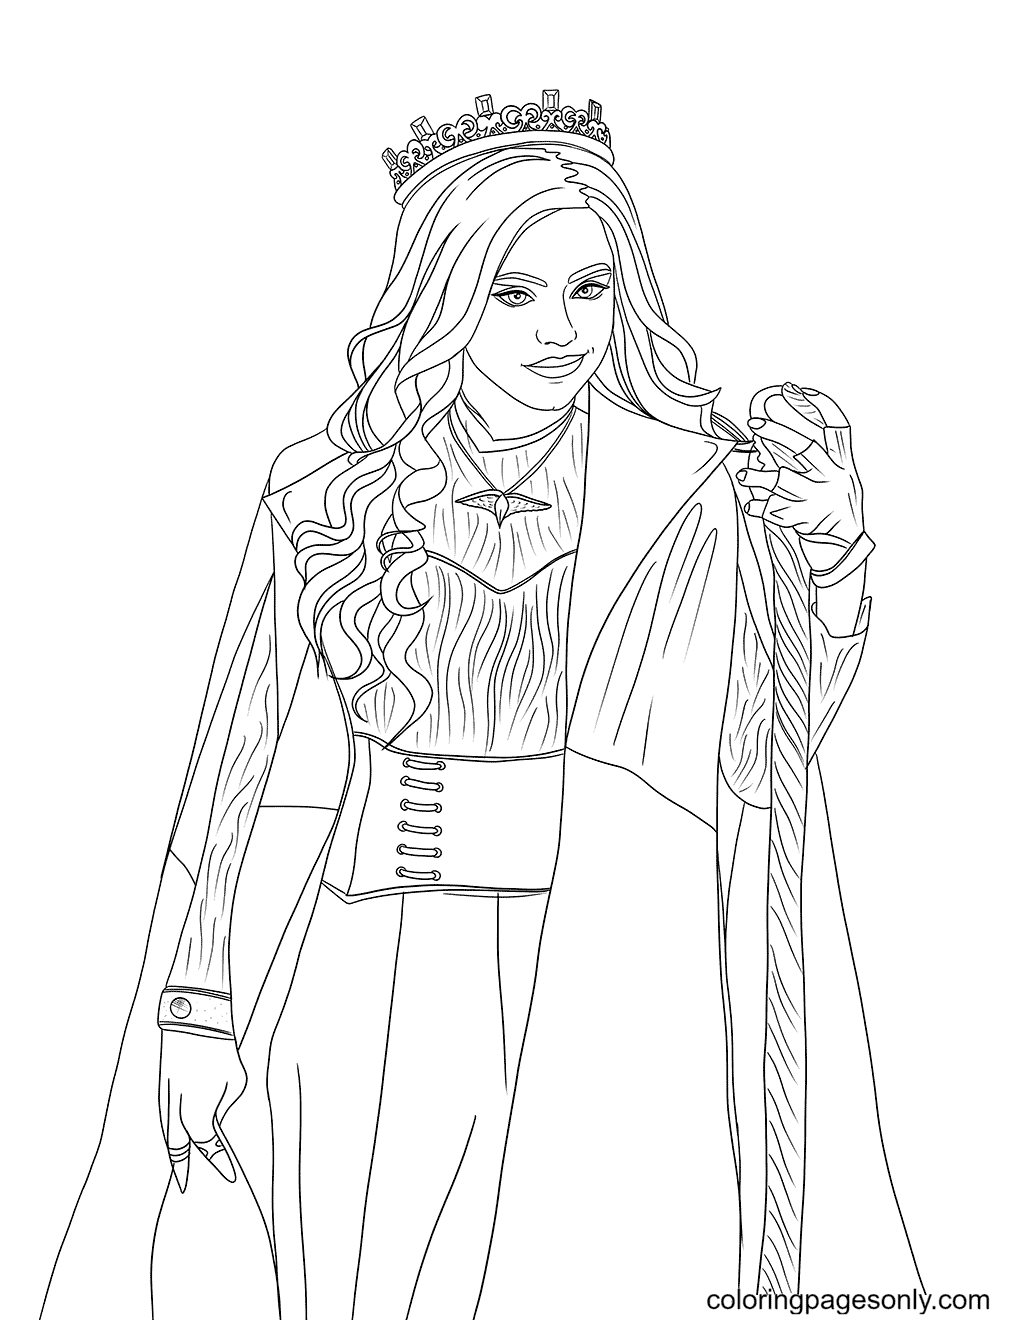 Free Printable Descendants Coloring Pages For Kids Descendants Coloring Pages Disney Coloring